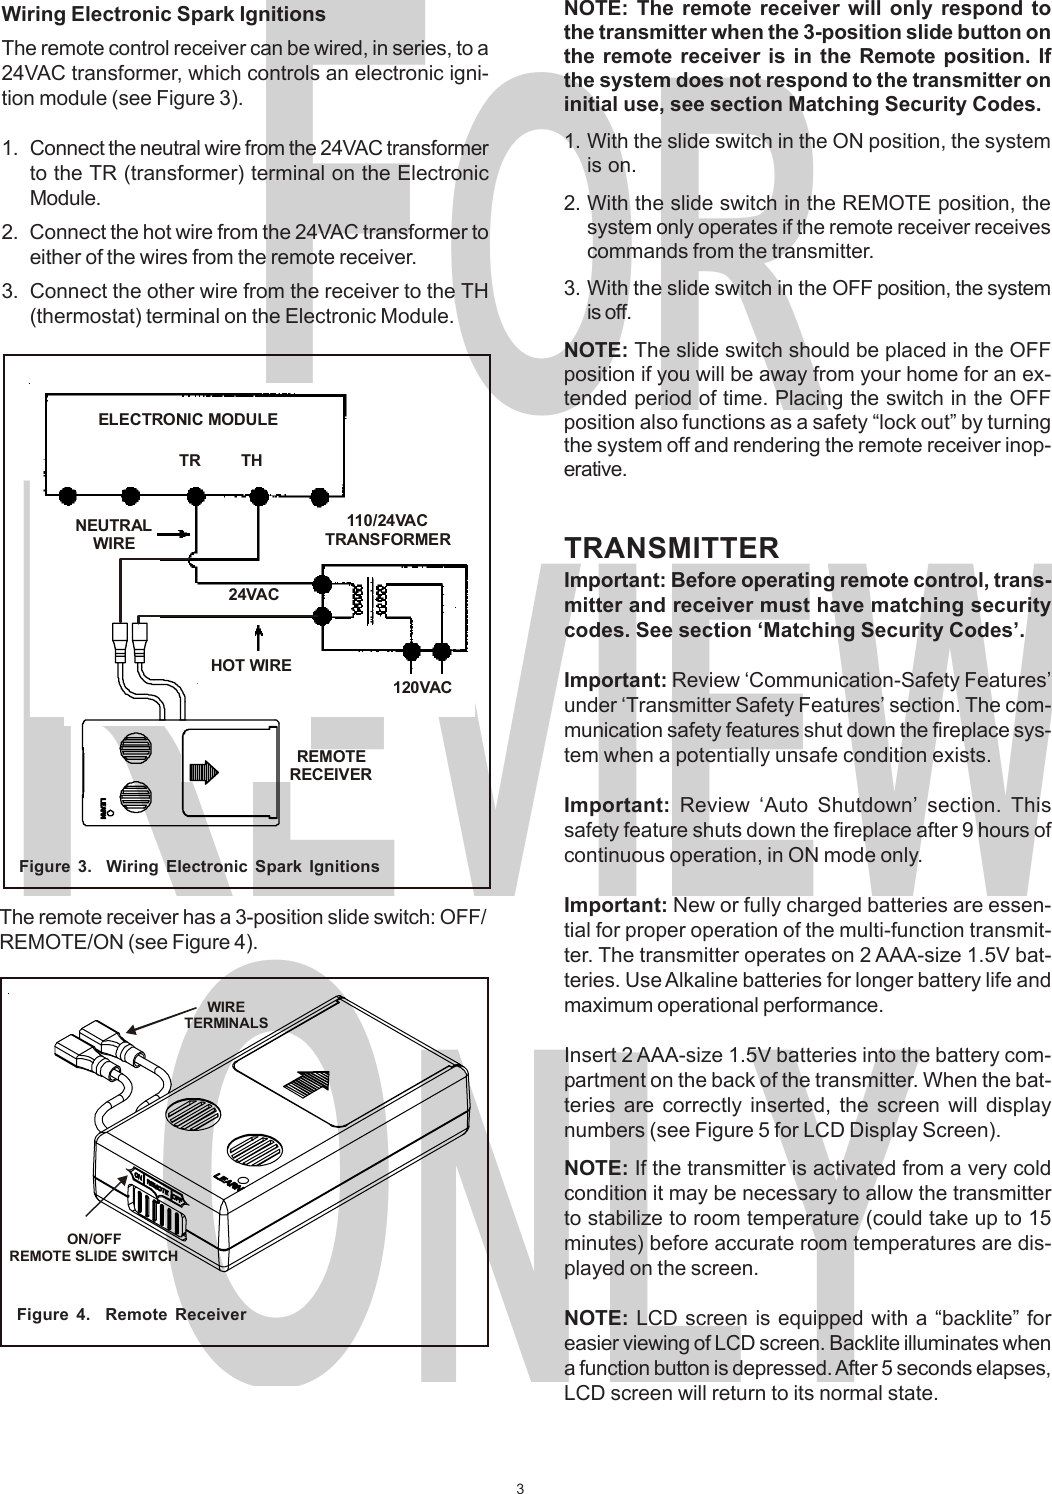 3FORREVIEWONLYWiring Electronic Spark IgnitionsThe remote control receiver can be wired, in series, to a24VAC transformer, which controls an electronic igni-tion module (see Figure 3).1. Connect the neutral wire from the 24VAC transformerto the TR (transformer) terminal on the ElectronicModule.2. Connect the hot wire from the 24VAC transformer toeither of the wires from the remote receiver.3. Connect the other wire from the receiver to the TH(thermostat) terminal on the Electronic Module.Figure 3.  Wiring Electronic Spark IgnitionsThe remote receiver has a 3-position slide switch: OFF/REMOTE/ON (see Figure 4).Figure 4.  Remote ReceiverNOTE: The remote receiver will only respond tothe transmitter when the 3-position slide button onthe remote receiver is in the Remote position. Ifthe system does not respond to the transmitter oninitial use, see section Matching Security Codes.1. With the slide switch in the ON position, the systemis on.2. With the slide switch in the REMOTE position, thesystem only operates if the remote receiver receivescommands from the transmitter.3. With the slide switch in the OFF position, the systemis off.NOTE: The slide switch should be placed in the OFFposition if you will be away from your home for an ex-tended period of time. Placing the switch in the OFFposition also functions as a safety “lock out” by turningthe system off and rendering the remote receiver inop-erative.TRANSMITTERImportant: Before operating remote control, trans-mitter and receiver must have matching securitycodes. See section ‘Matching Security Codes’.Important: Review ‘Communication-Safety Features’under ‘Transmitter Safety Features’ section. The com-munication safety features shut down the fireplace sys-tem when a potentially unsafe condition exists.Important:  Review ‘Auto Shutdown’ section. Thissafety feature shuts down the fireplace after 9 hours ofcontinuous operation, in ON mode only.Important: New or fully charged batteries are essen-tial for proper operation of the multi-function transmit-ter. The transmitter operates on 2 AAA-size 1.5V bat-teries. Use Alkaline batteries for longer battery life andmaximum operational performance.Insert 2 AAA-size 1.5V batteries into the battery com-partment on the back of the transmitter. When the bat-teries are correctly inserted, the screen will displaynumbers (see Figure 5 for LCD Display Screen).NOTE: If the transmitter is activated from a very coldcondition it may be necessary to allow the transmitterto stabilize to room temperature (could take up to 15minutes) before accurate room temperatures are dis-played on the screen.NOTE: LCD screen is equipped with a “backlite” foreasier viewing of LCD screen. Backlite illuminates whena function button is depressed. After 5 seconds elapses,LCD screen will return to its normal state.WIRETERMINALSON/OFFREMOTE SLIDE SWITCHELECTRONIC MODULETR THNEUTRALWIRE110/24VACTRANSFORMER24VACHOT WIRE120VACREMOTERECEIVER